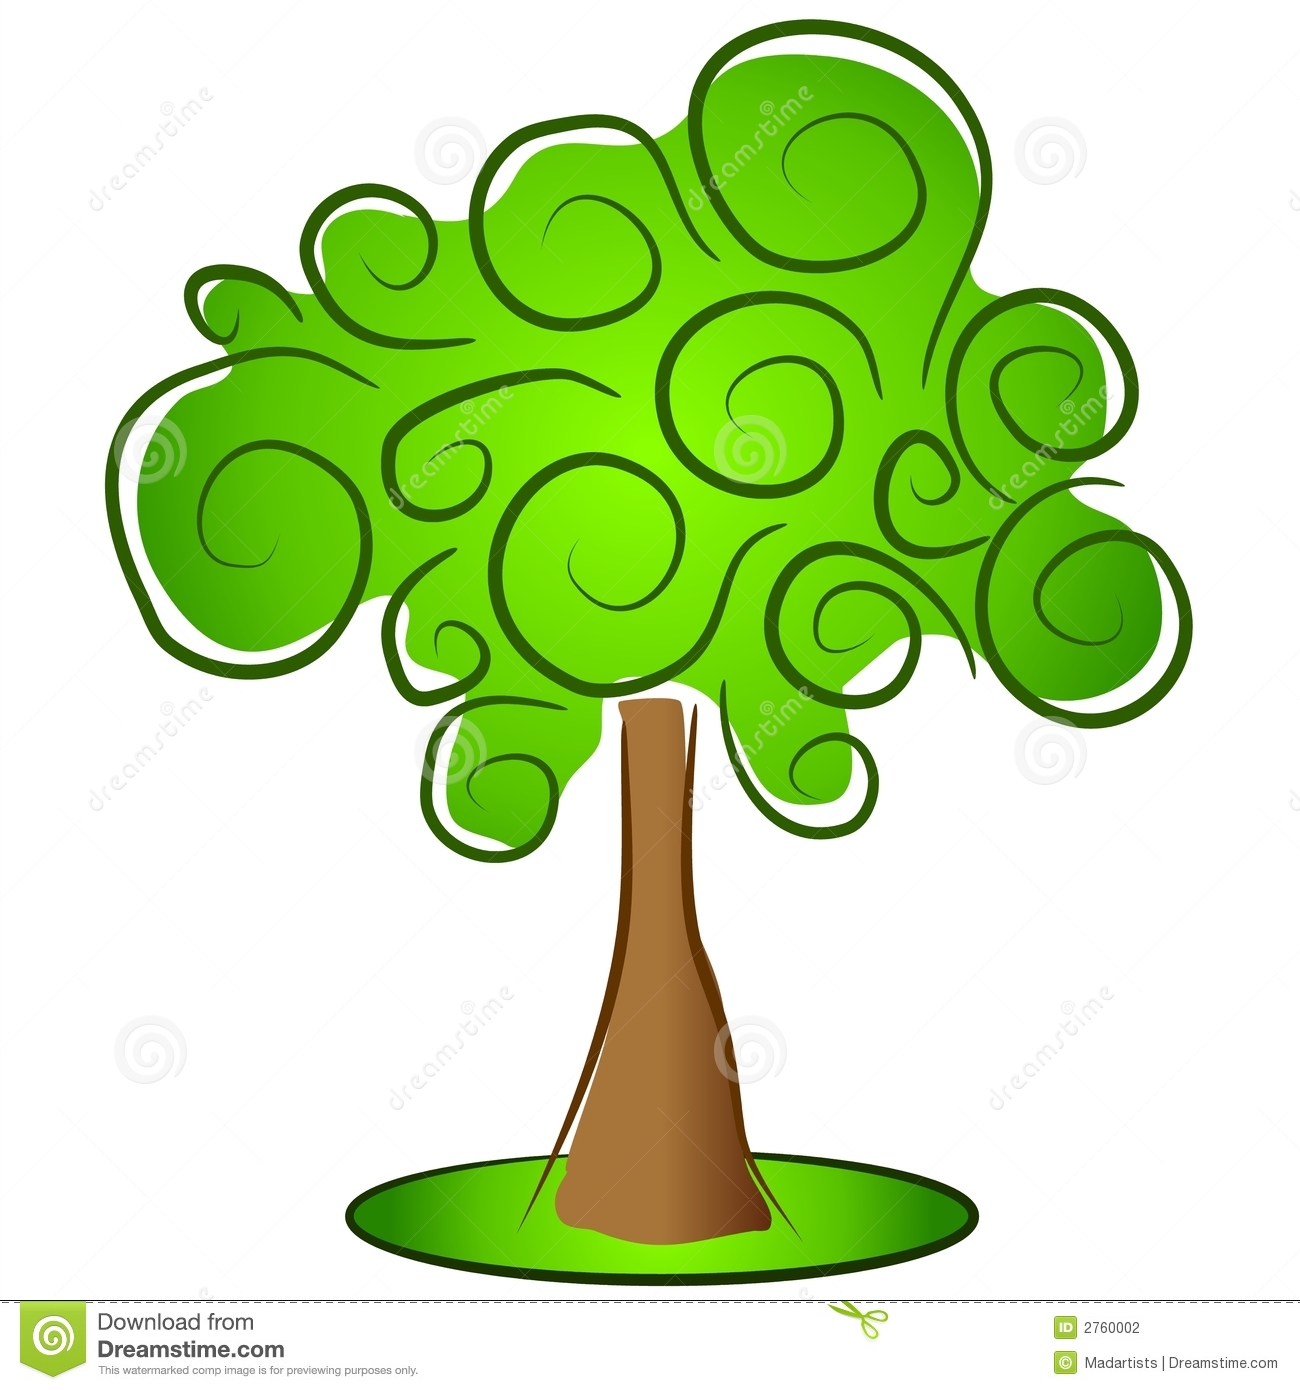 There Is 55 Clip Art Of Skinny Trees Free Cliparts All Used For Free